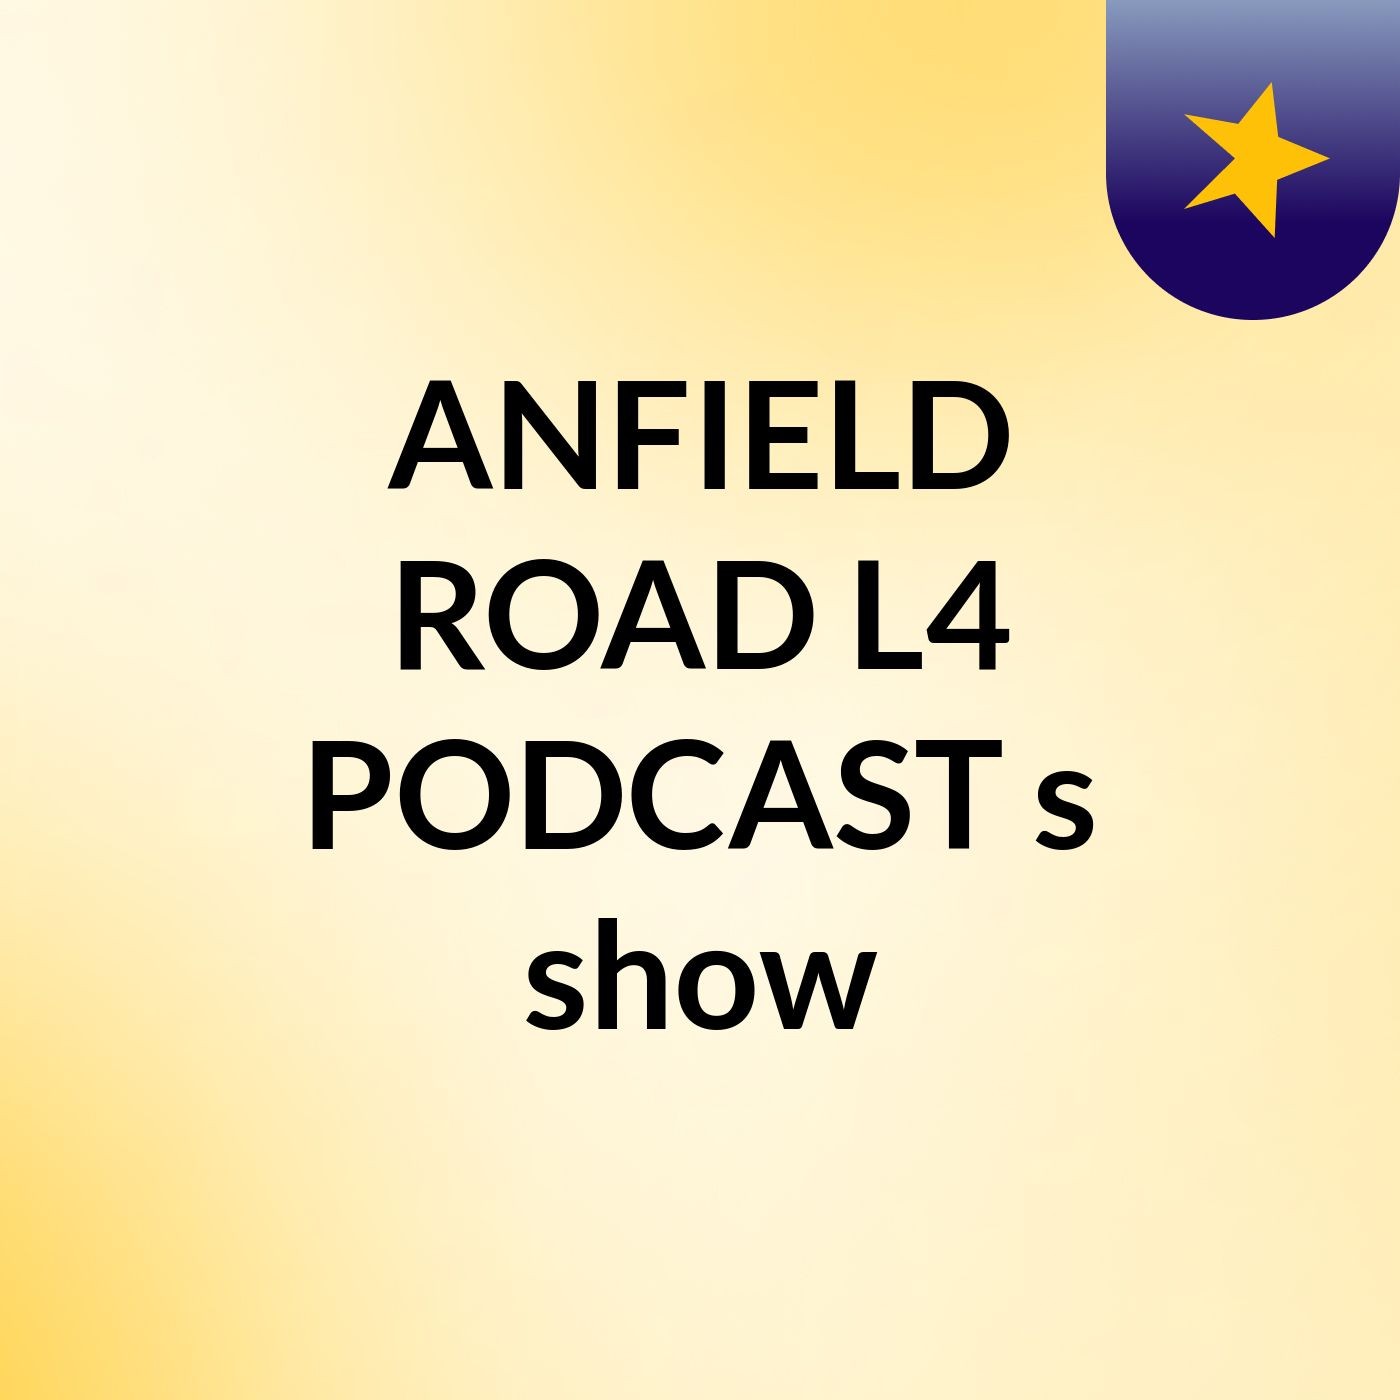 ANFIELD ROAD L4 PODCAST's show